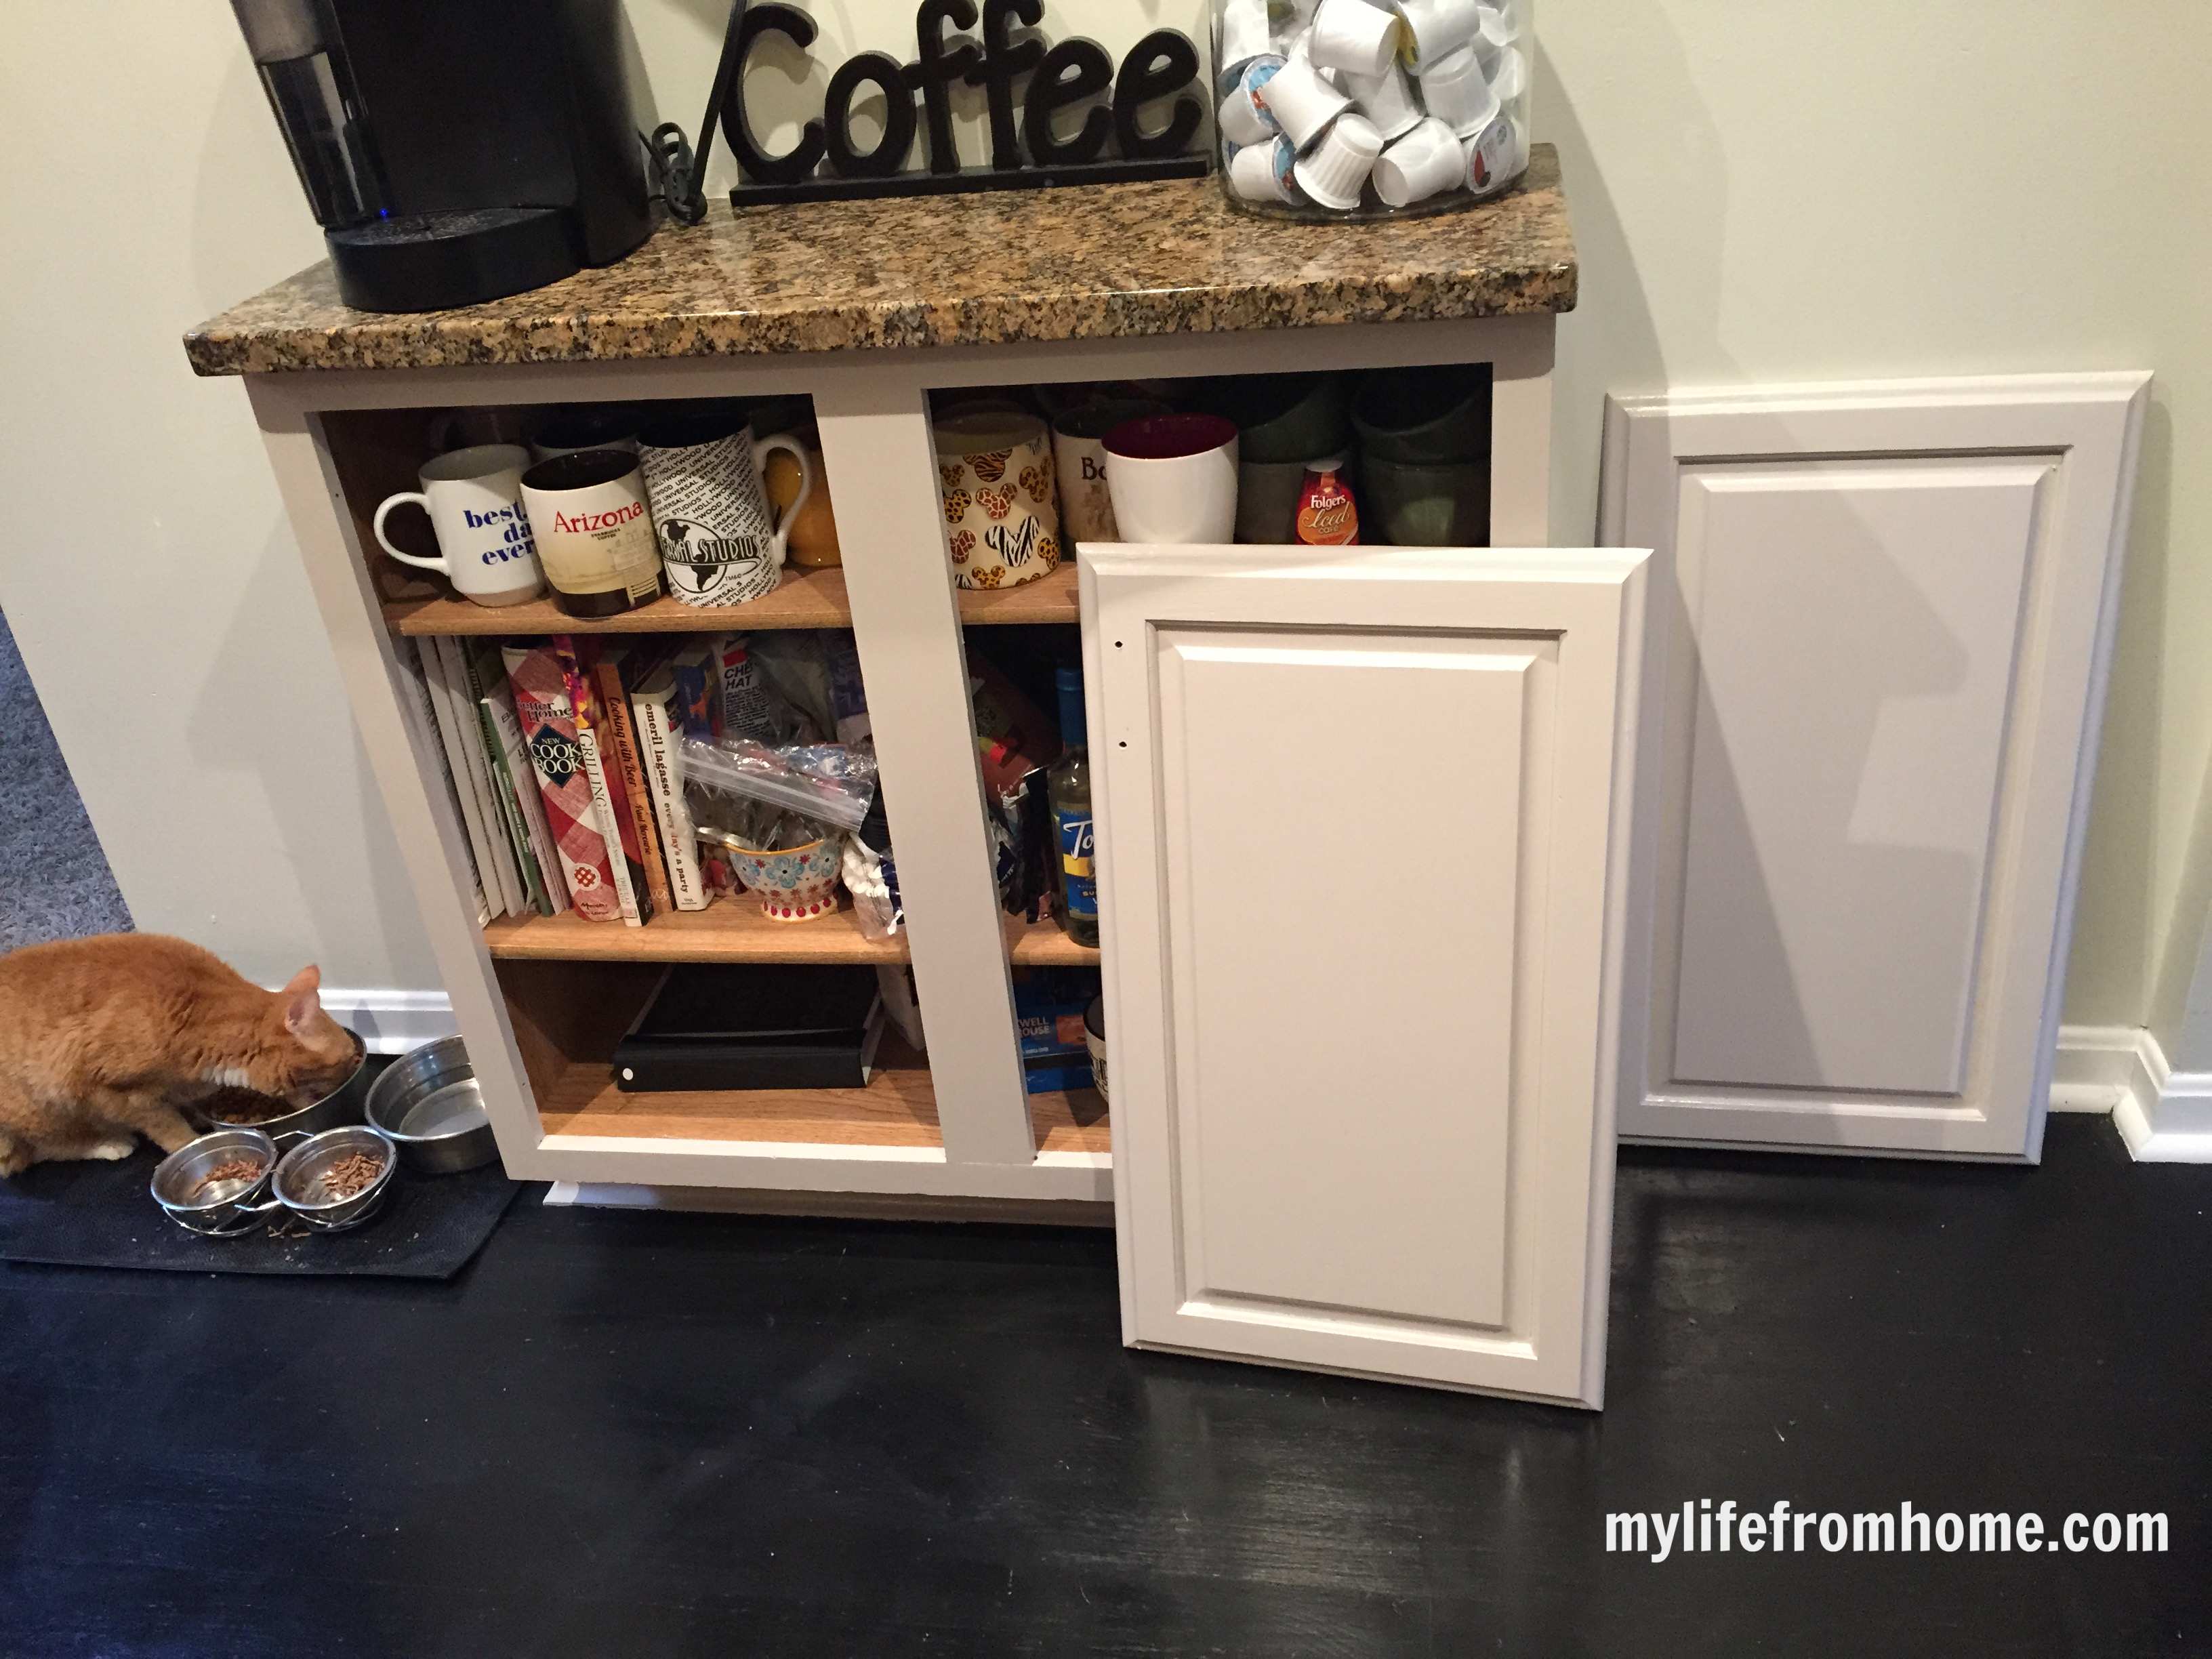 Painted cabinets in the kitchen, step by step instructions | painted cabinets | kitchen | painting cabinets | paint | kitchen transformation |